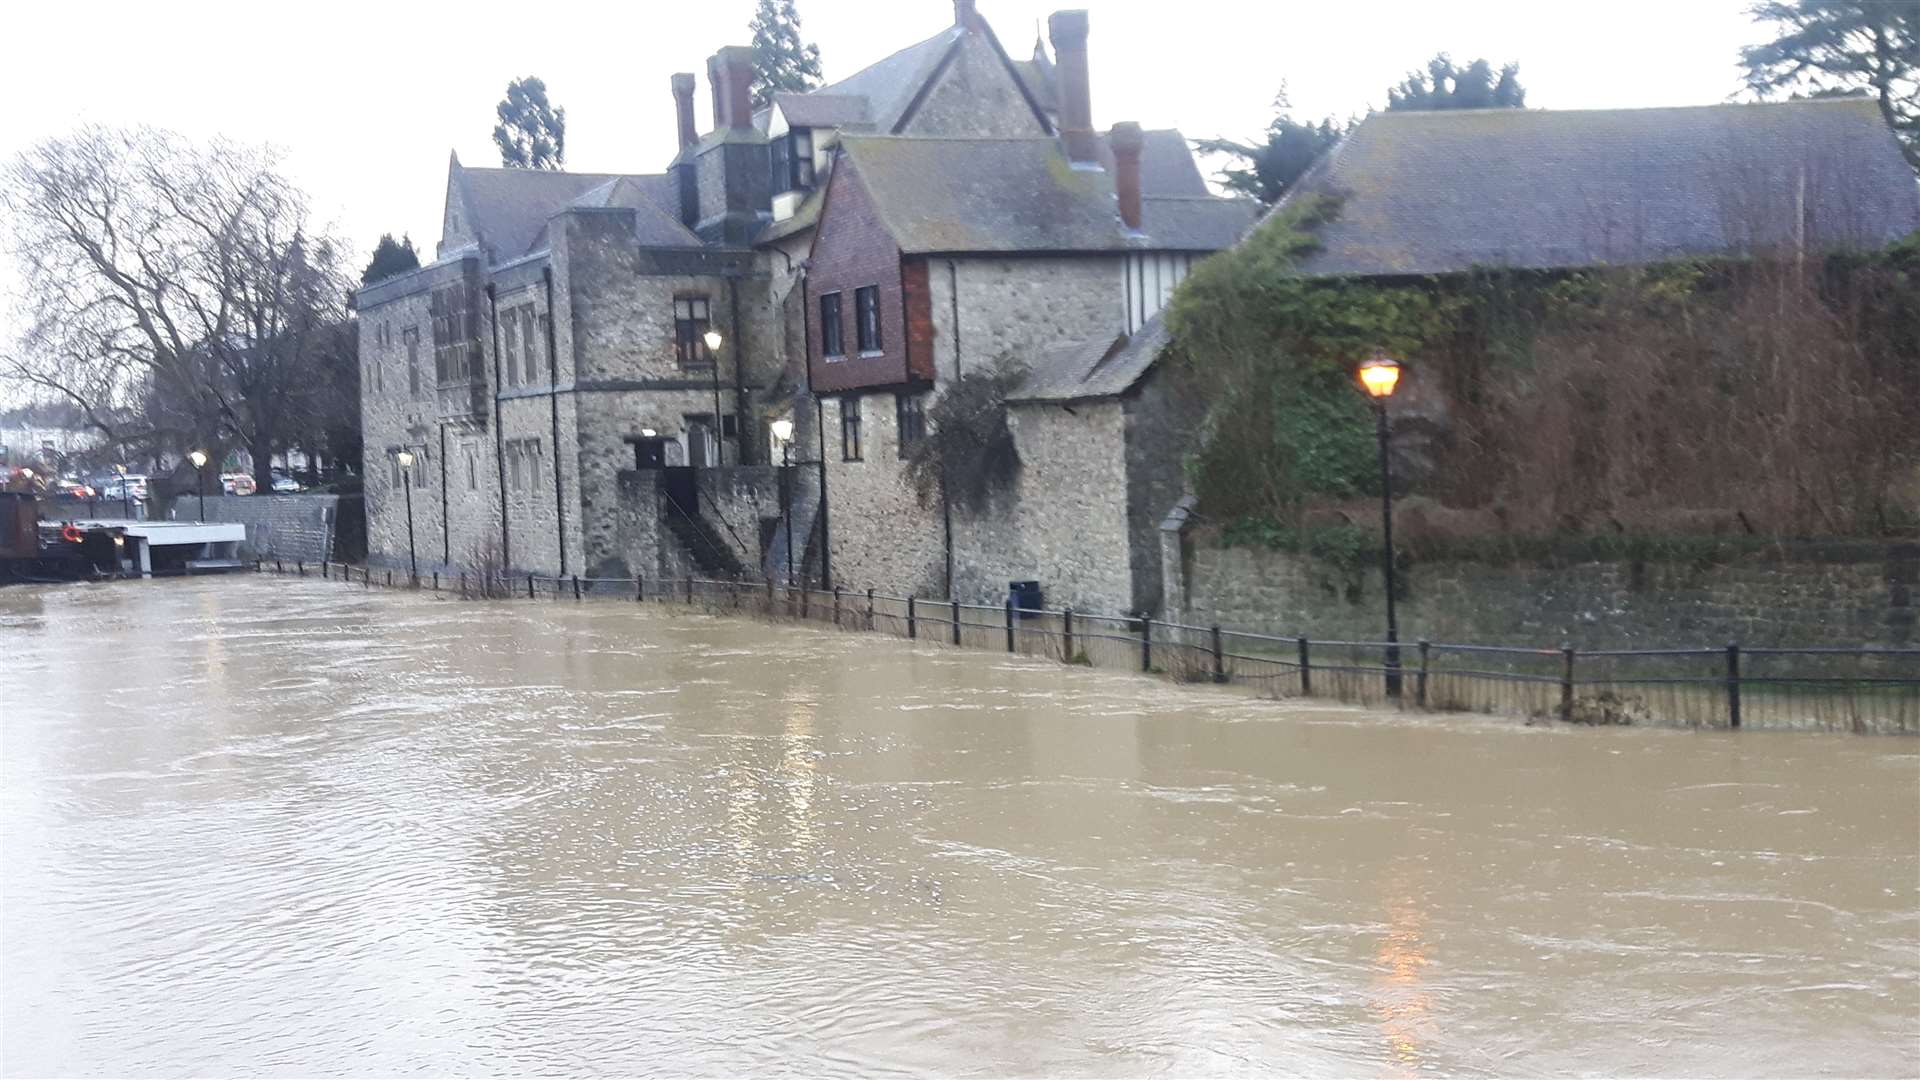 The River Medway is exceptionally high in Maidstone